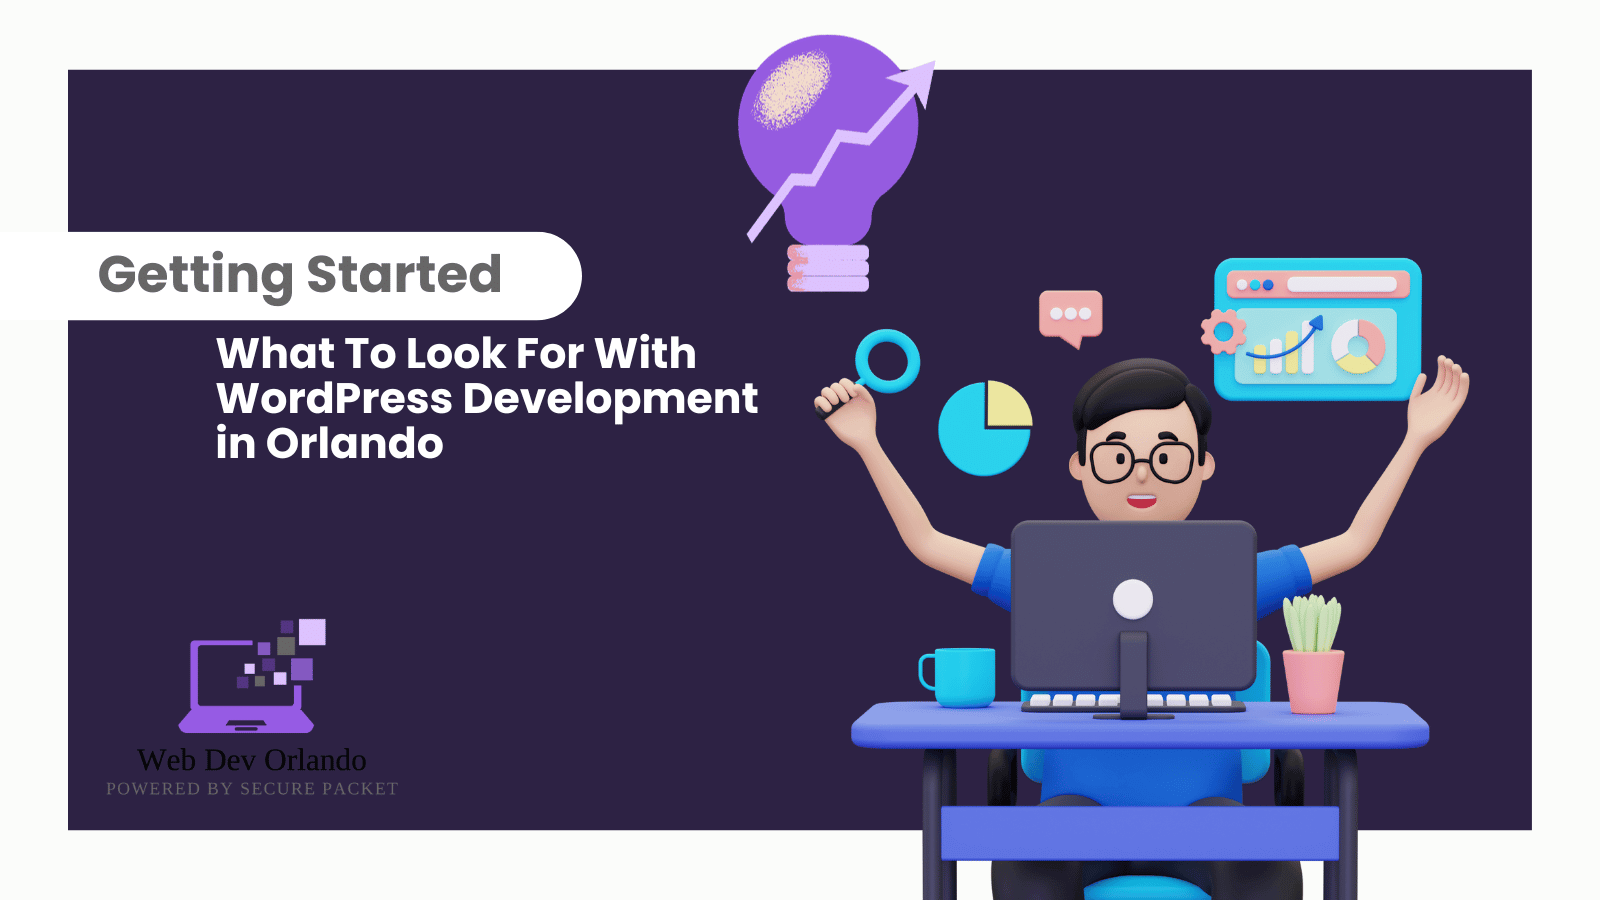 What to look for with WordPress Development in Orlando